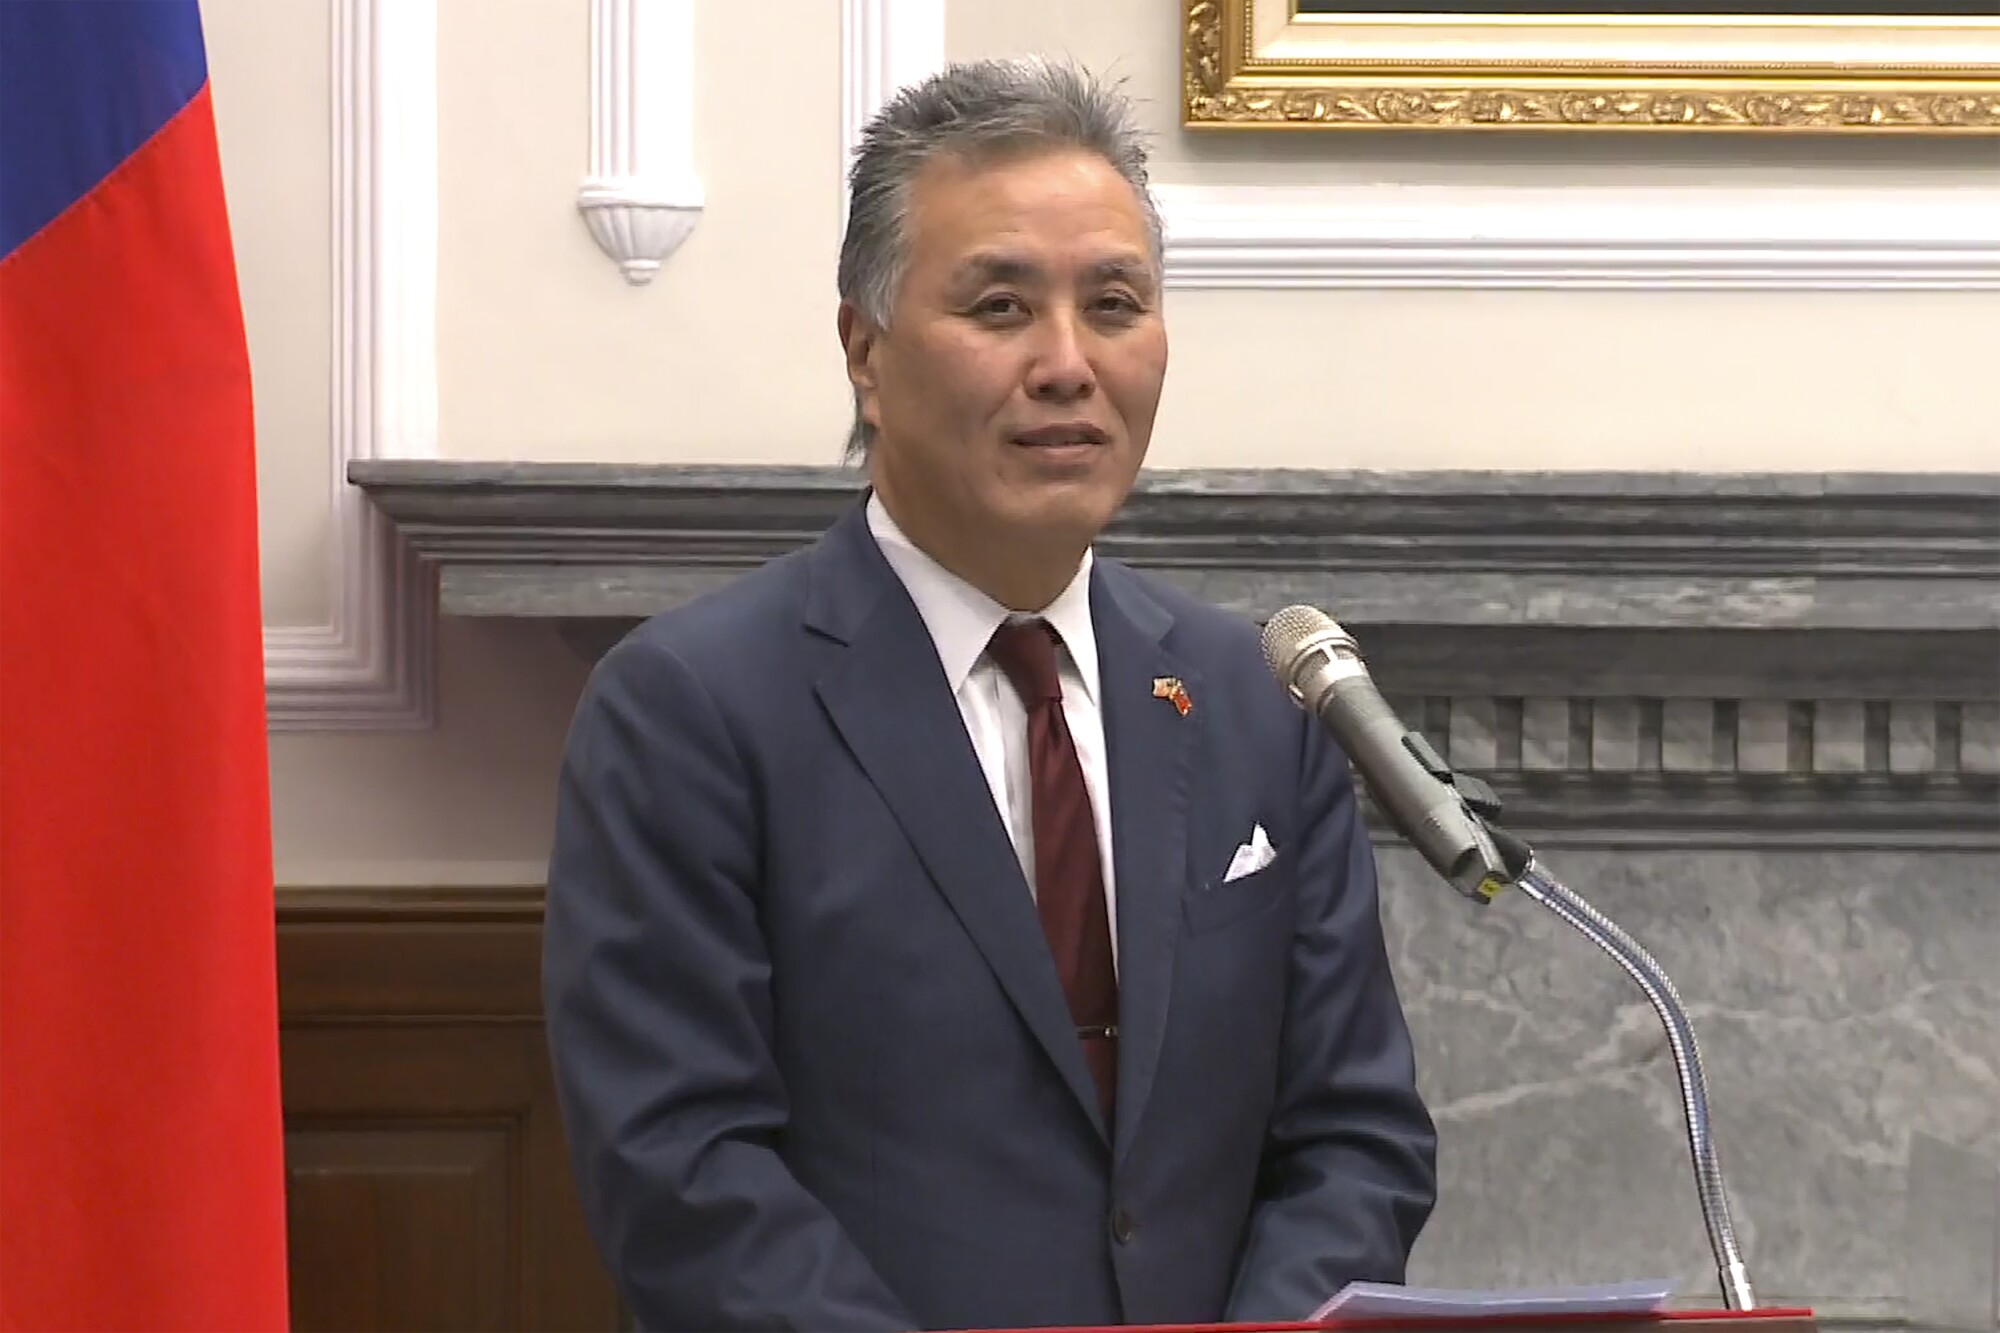 Deputy Mark Takano is in front of a microphone.